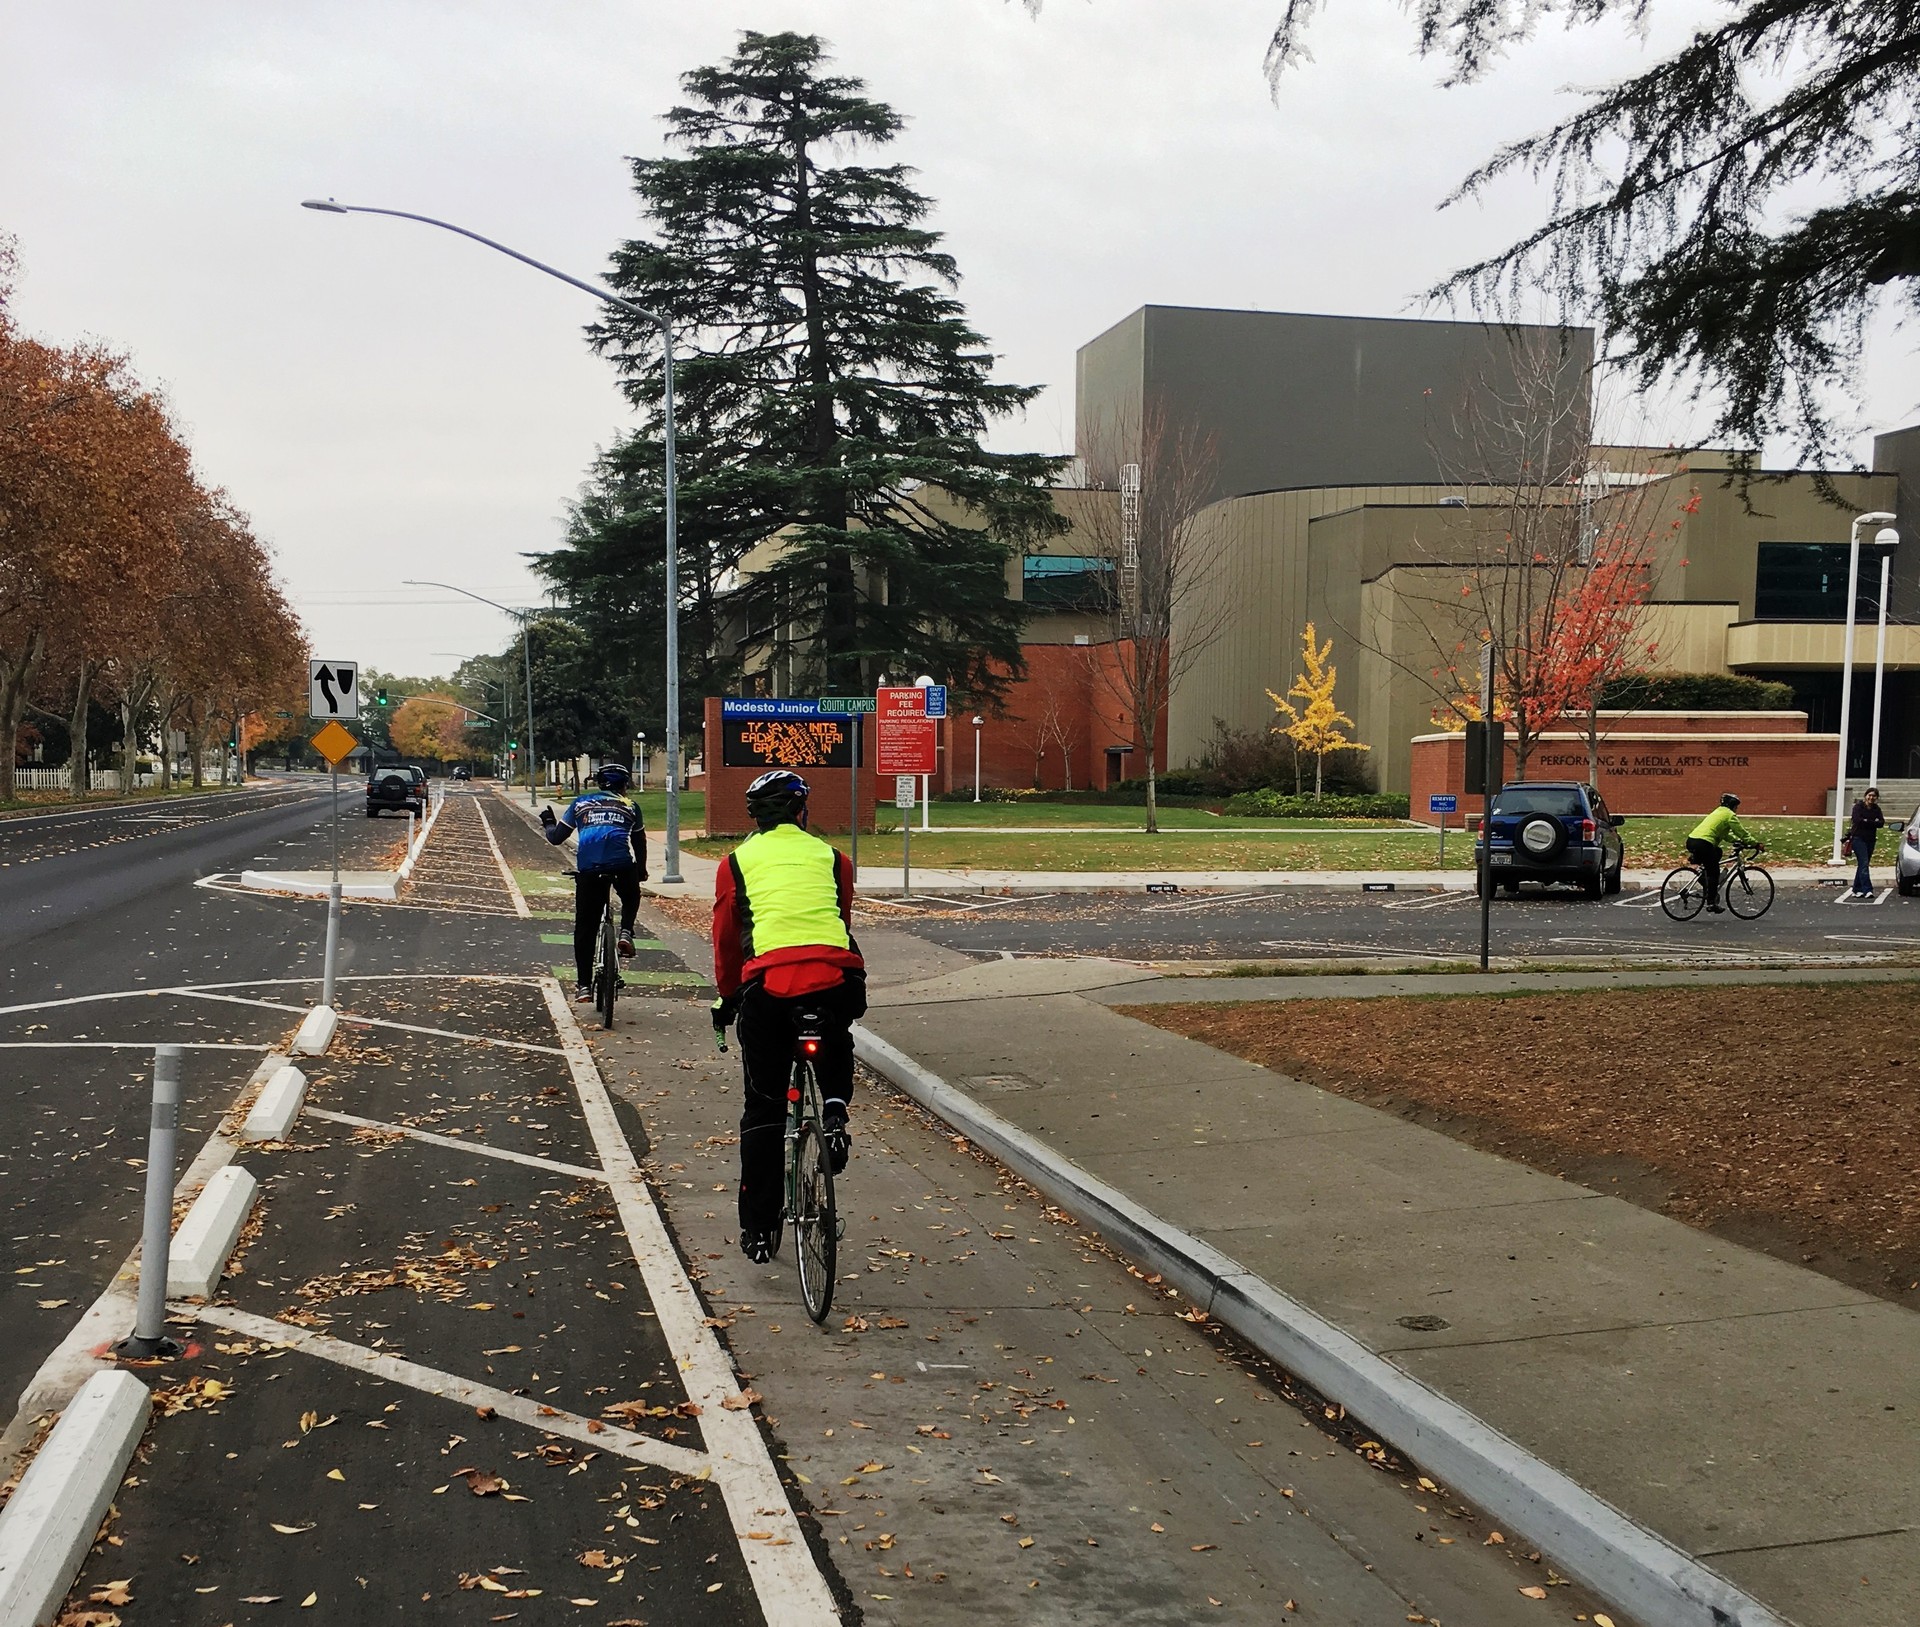 Bikers use new lanes opened last year in the Modesto Junior College area. The city paid $1.5 million in local funds to complete the project.